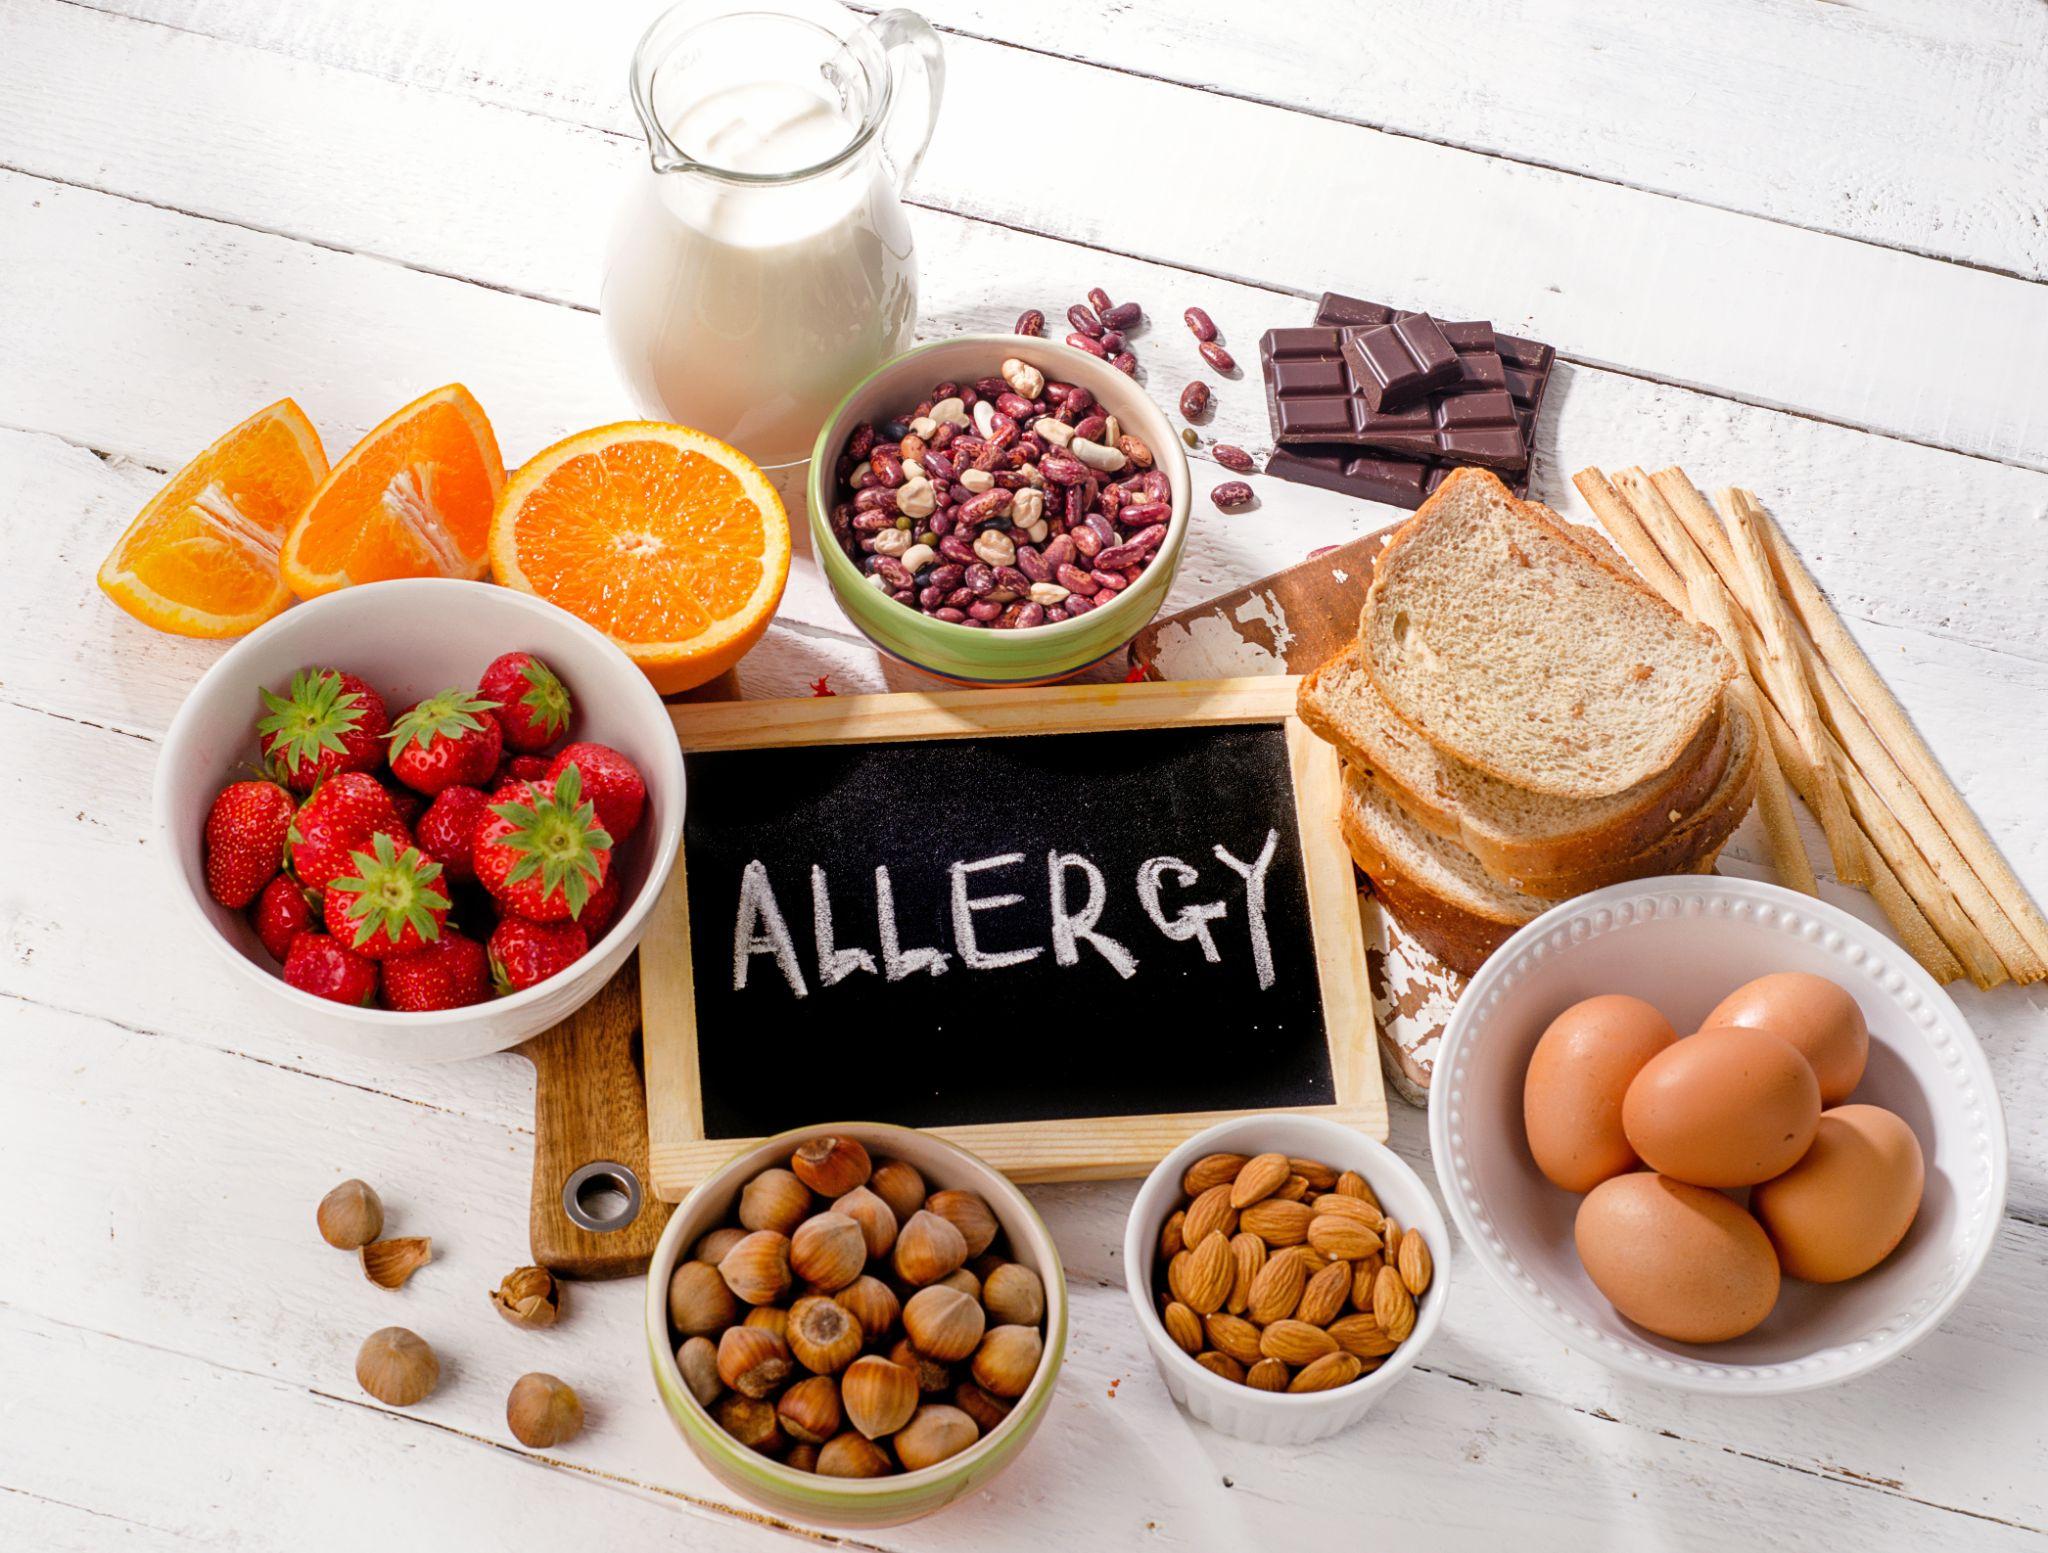 Allergic food on wooden background